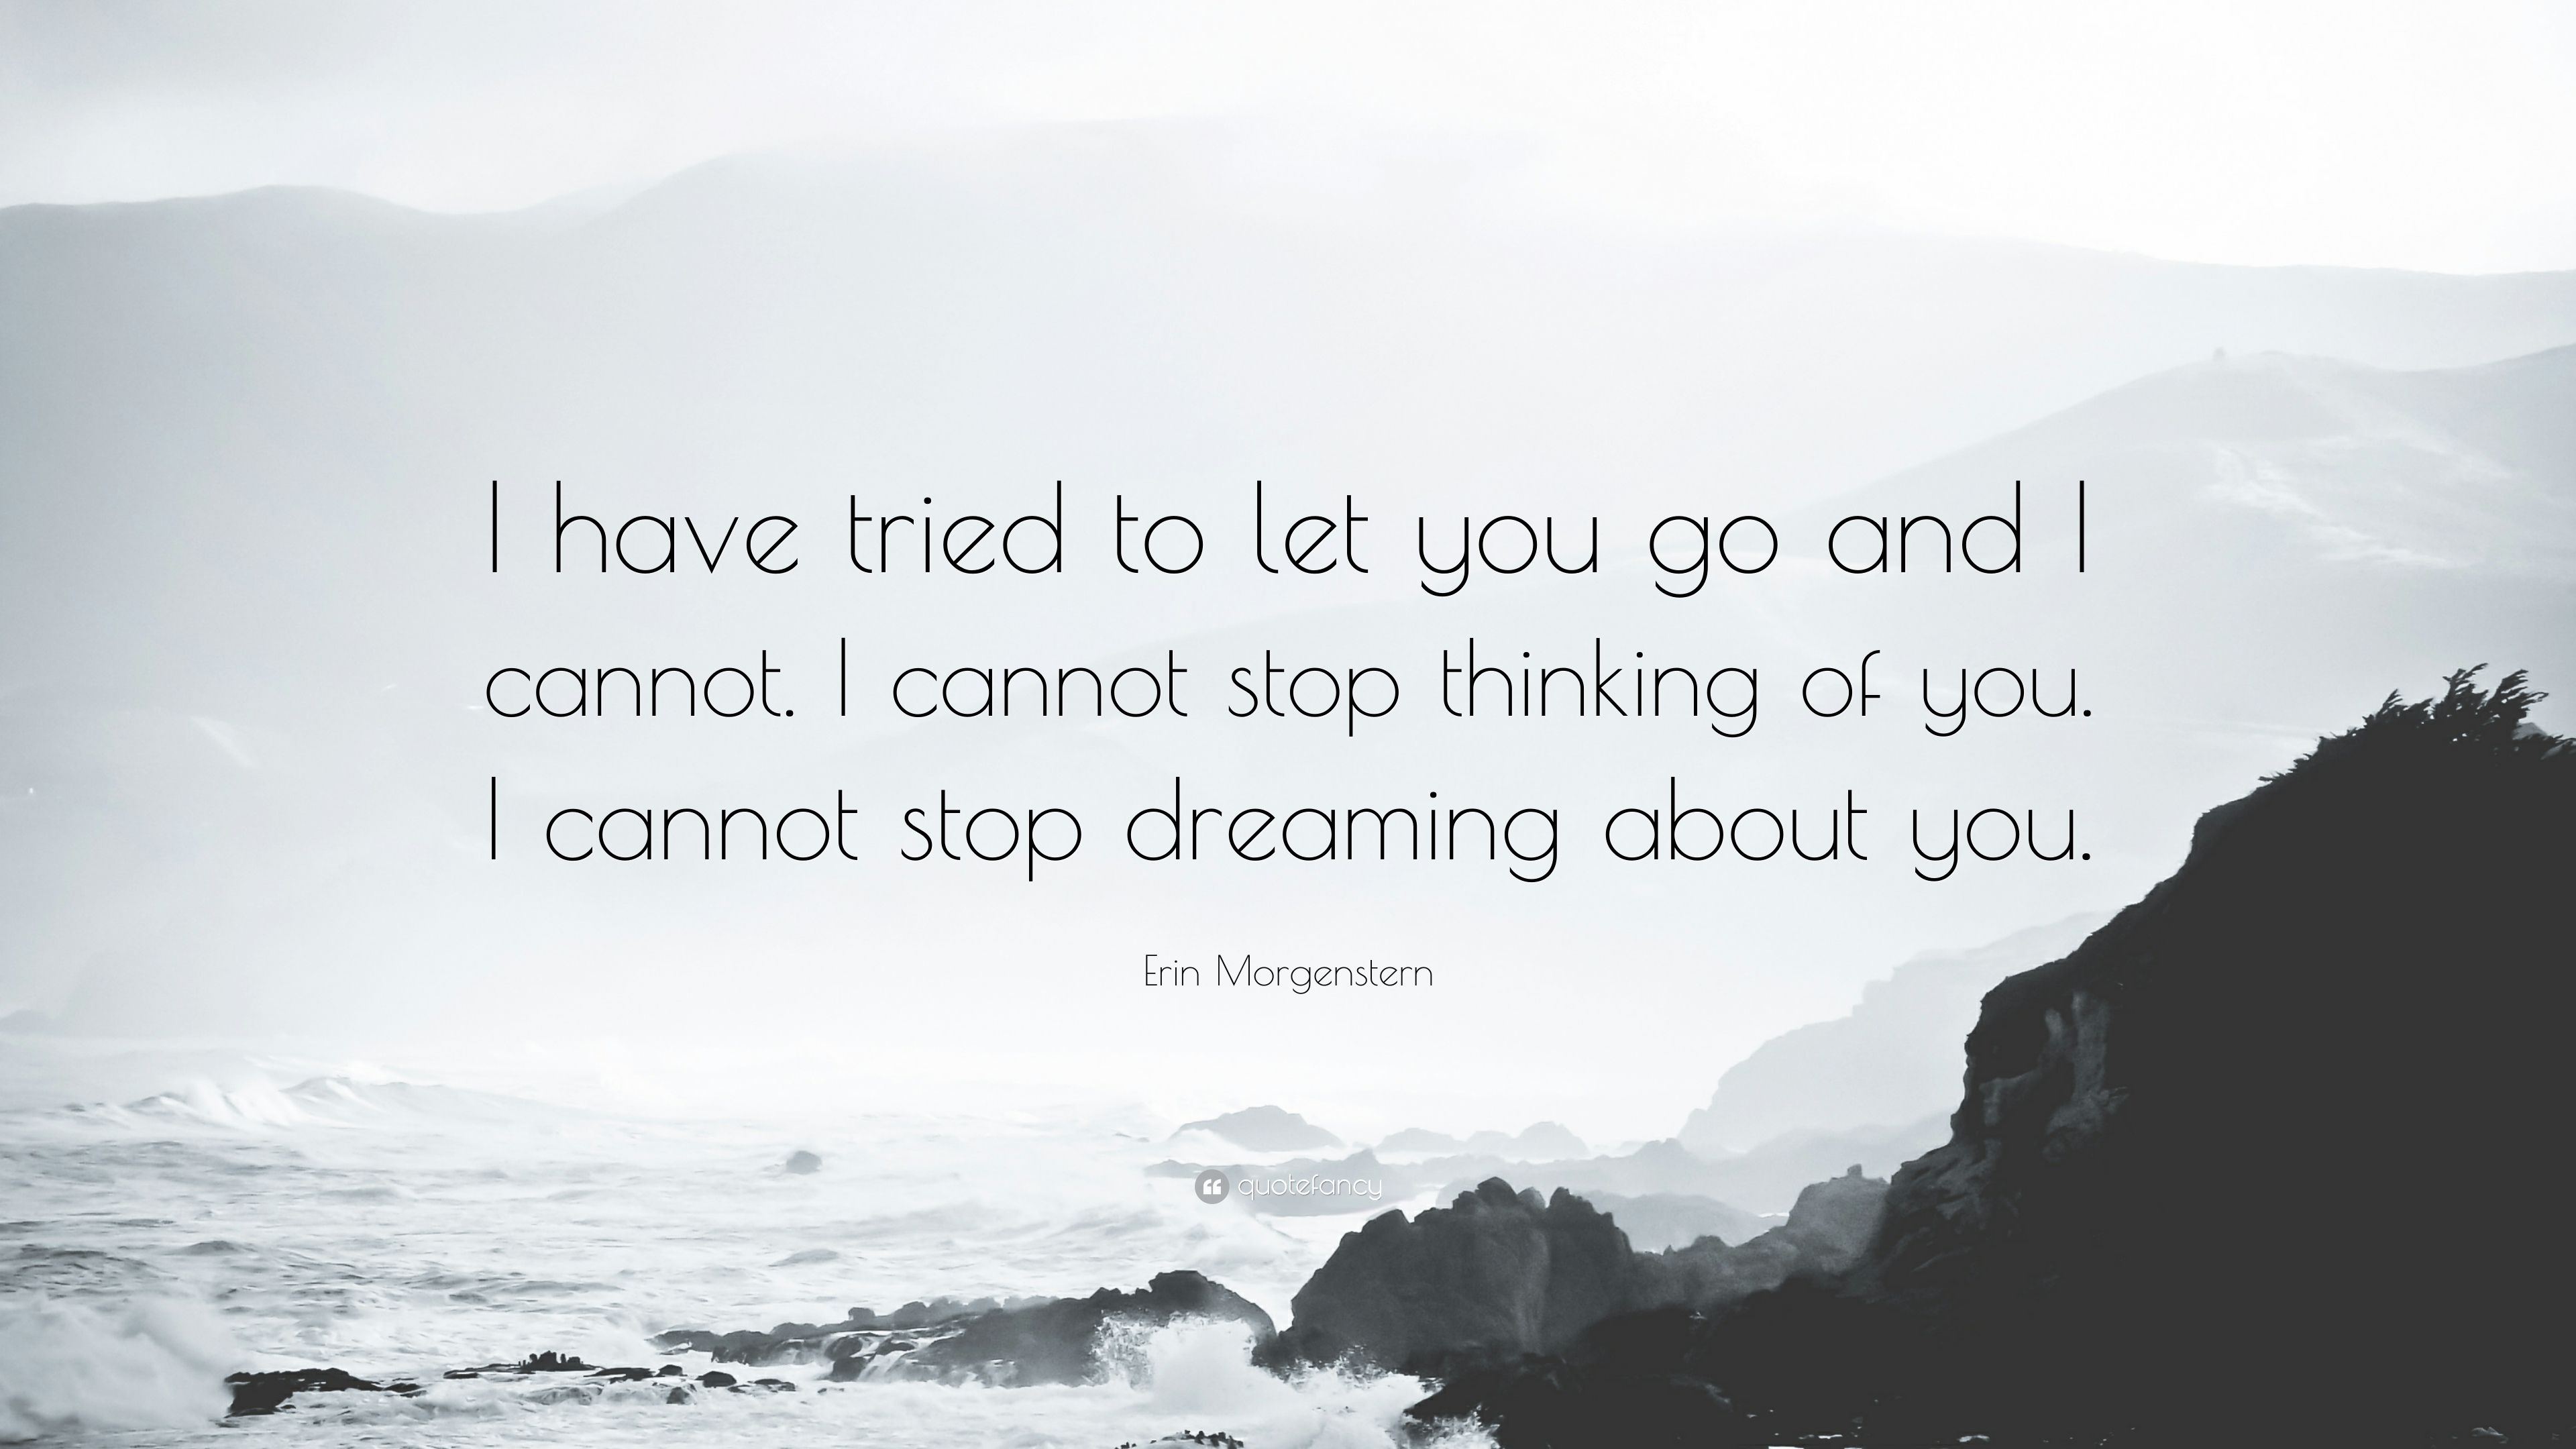 Erin Morgenstern Quote: “I have tried to let you go and I cannot. I ...